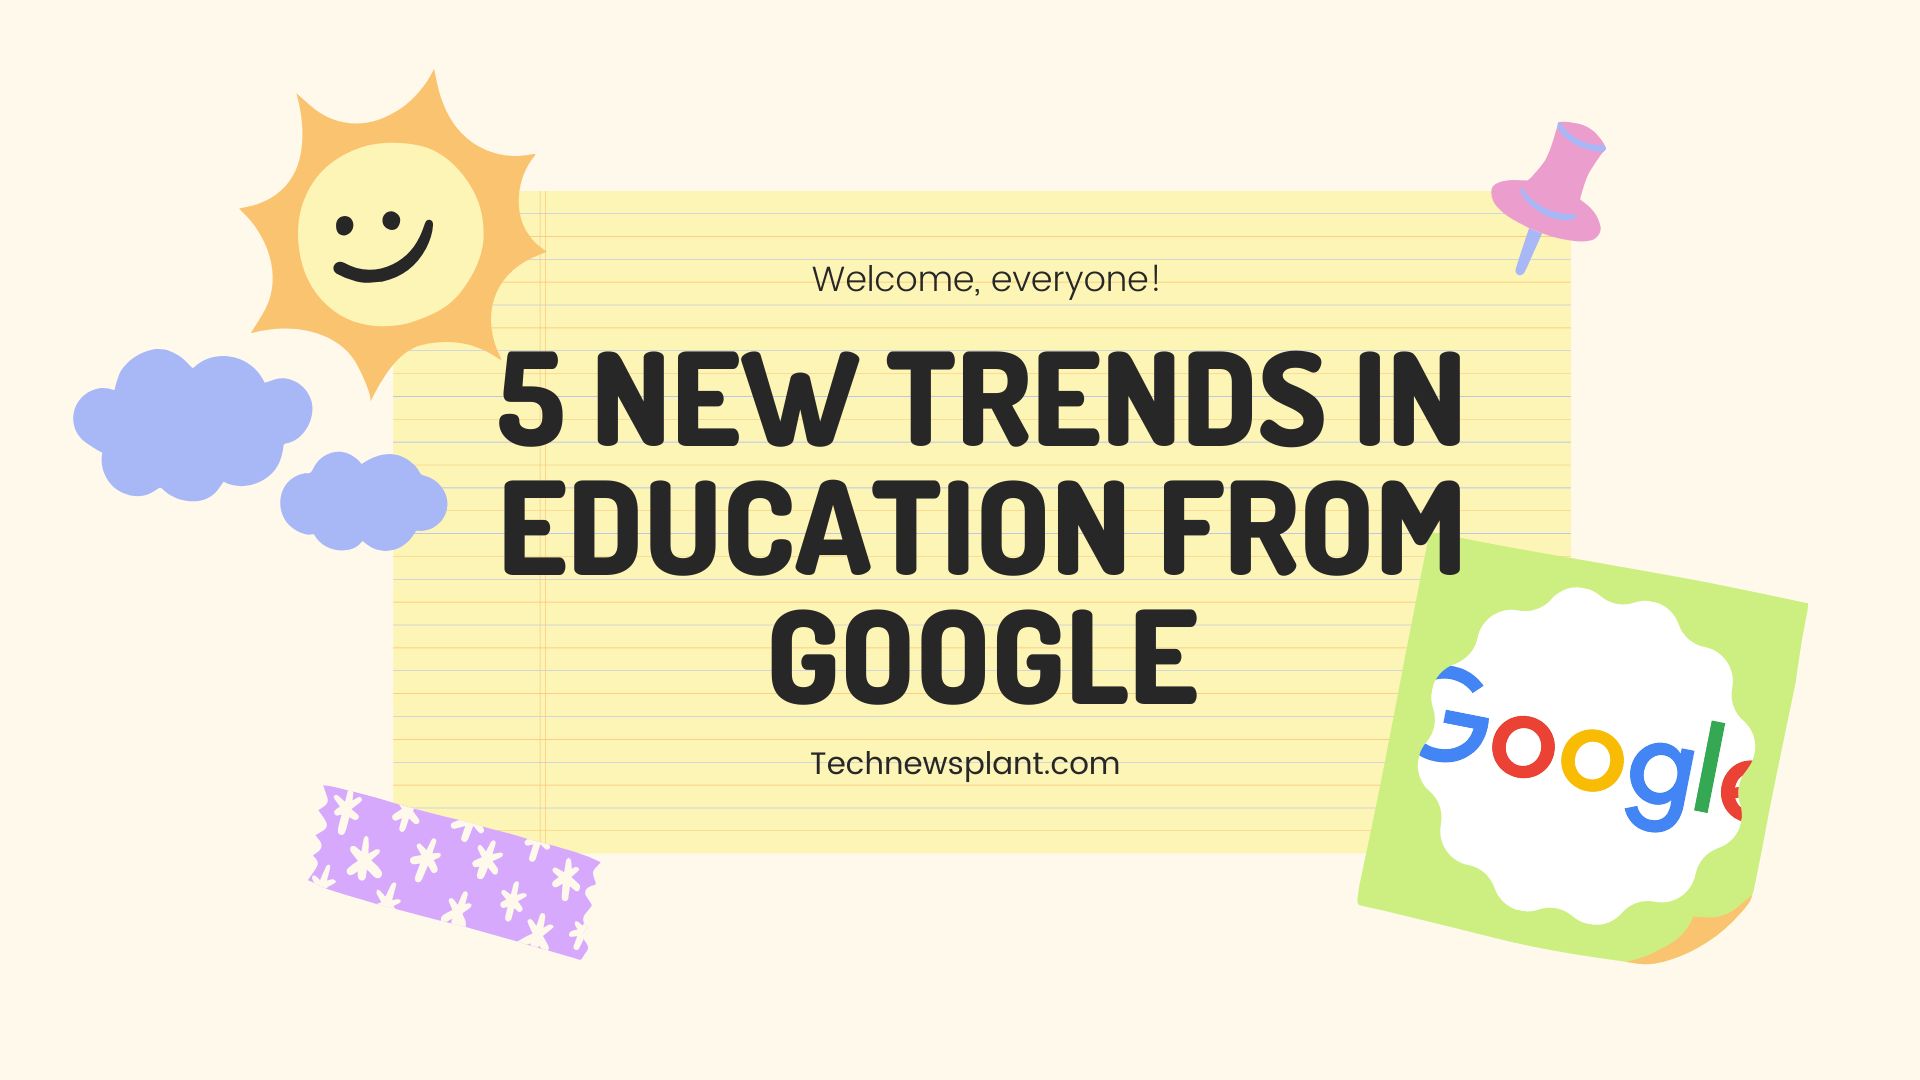 5 NEW TRENDS IN EDUCATION FROM GOOGLE